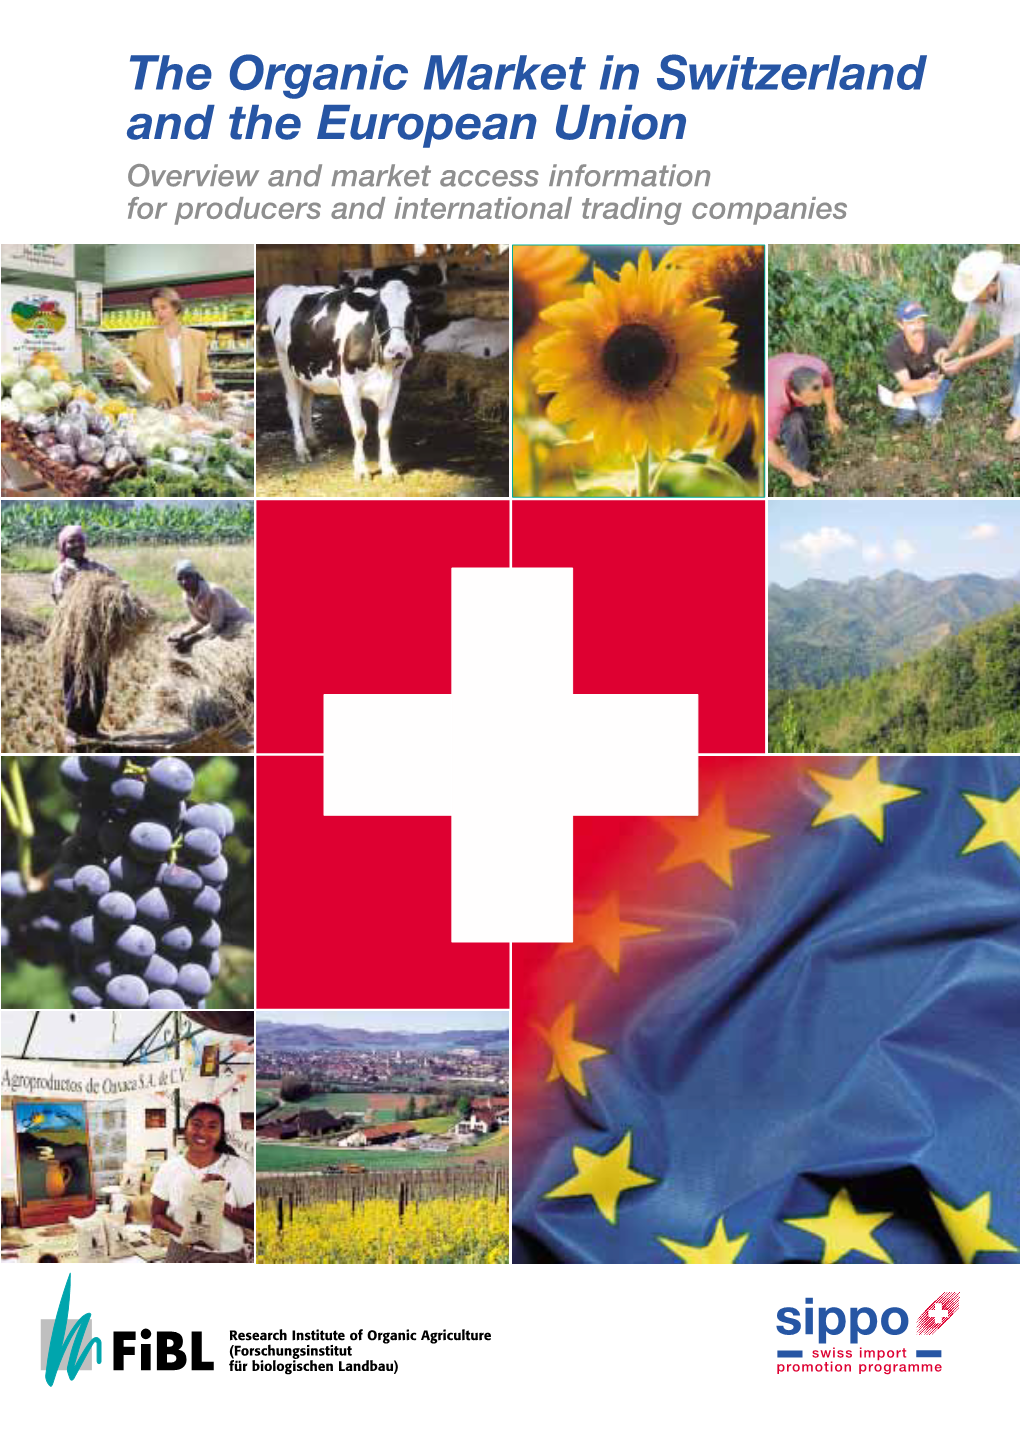 The Organic Market in Switzerland and the European Union Overview and Market Access Information for Producers and International Trading Companies